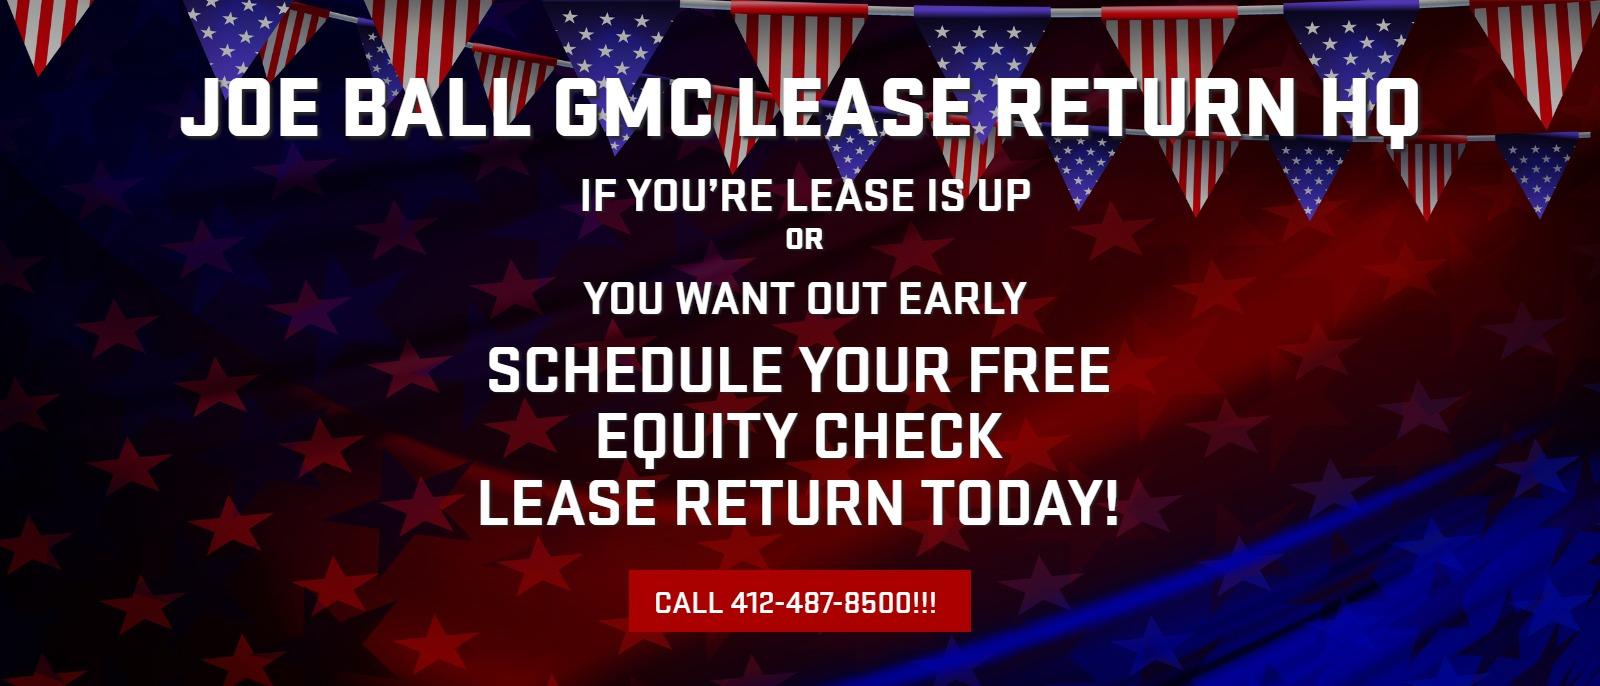 IF YOU’RE LEASE IS UP OR YOU WANT OUT EARLY, SCHEDULE YOUR FREE EQUITY CHECK OR LEASE RETURN TODAY!

CALL 412-487-8500!!!